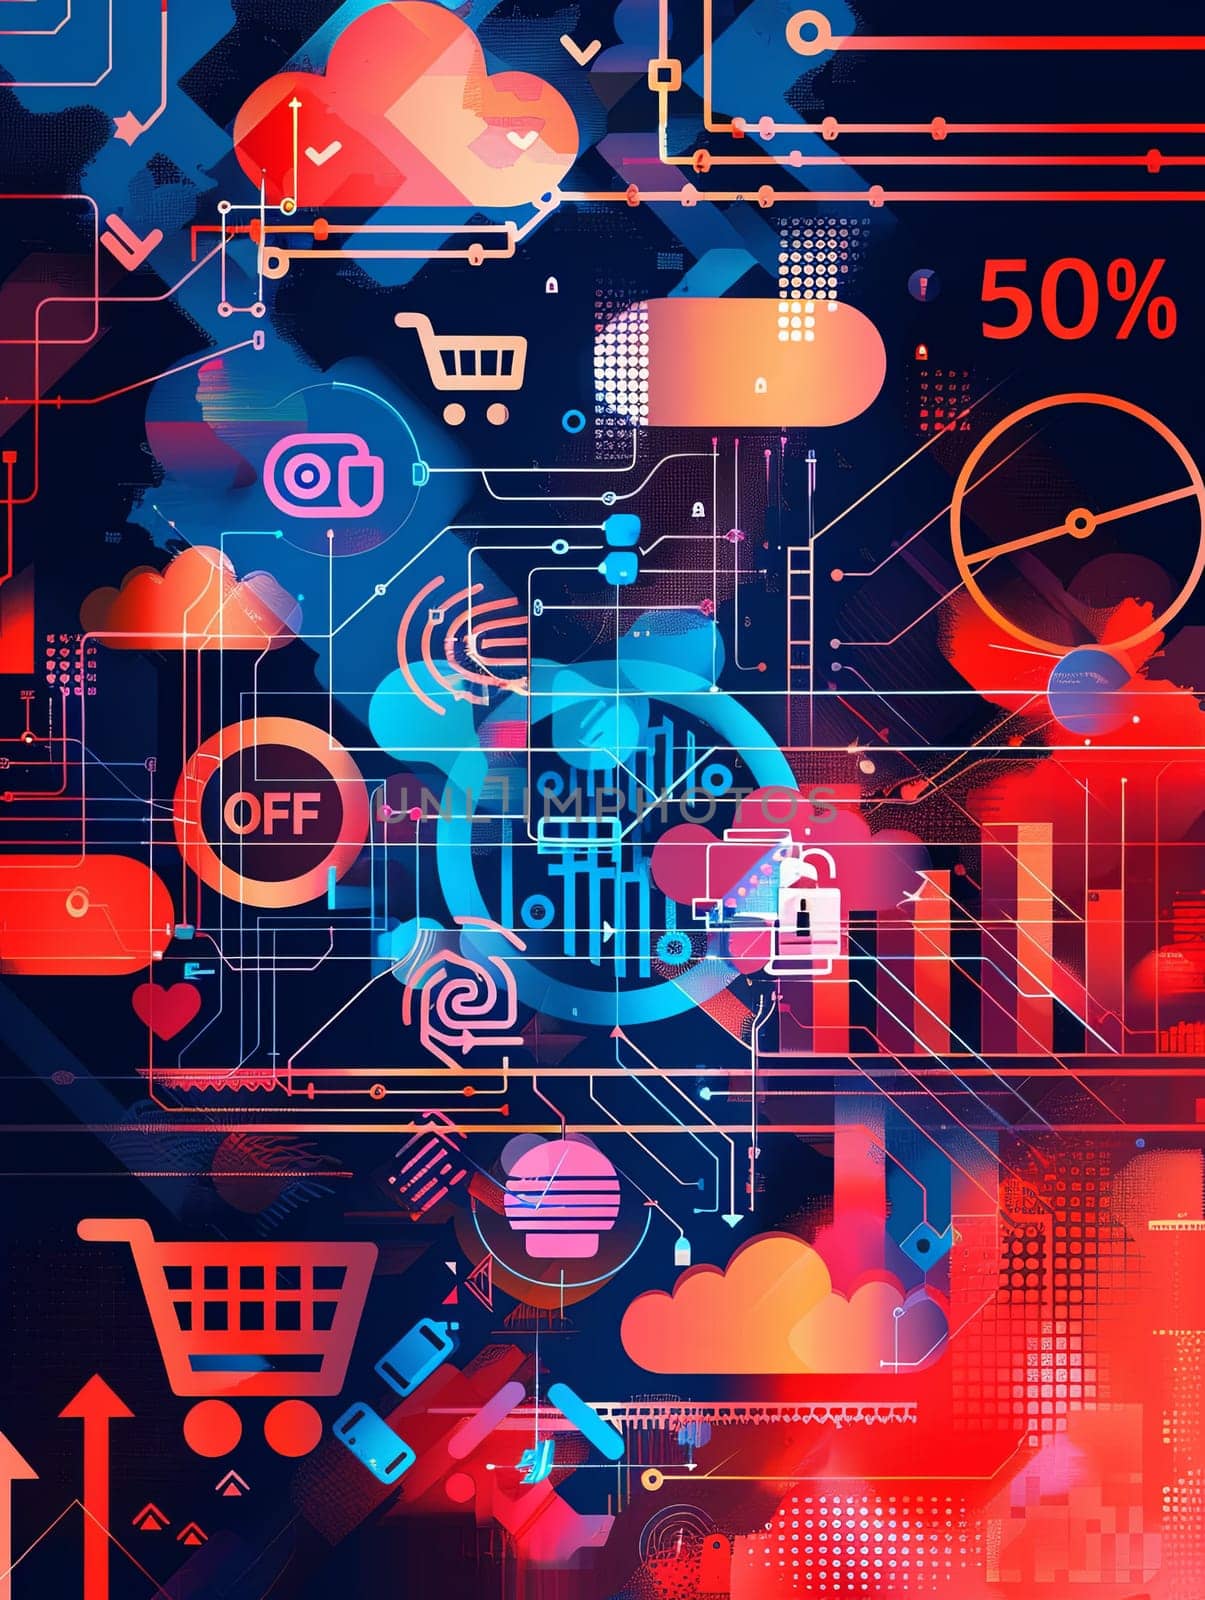 Abstract digital background depicting online shopping with shopping carts, product icons, and a prominent 50% OFF text.